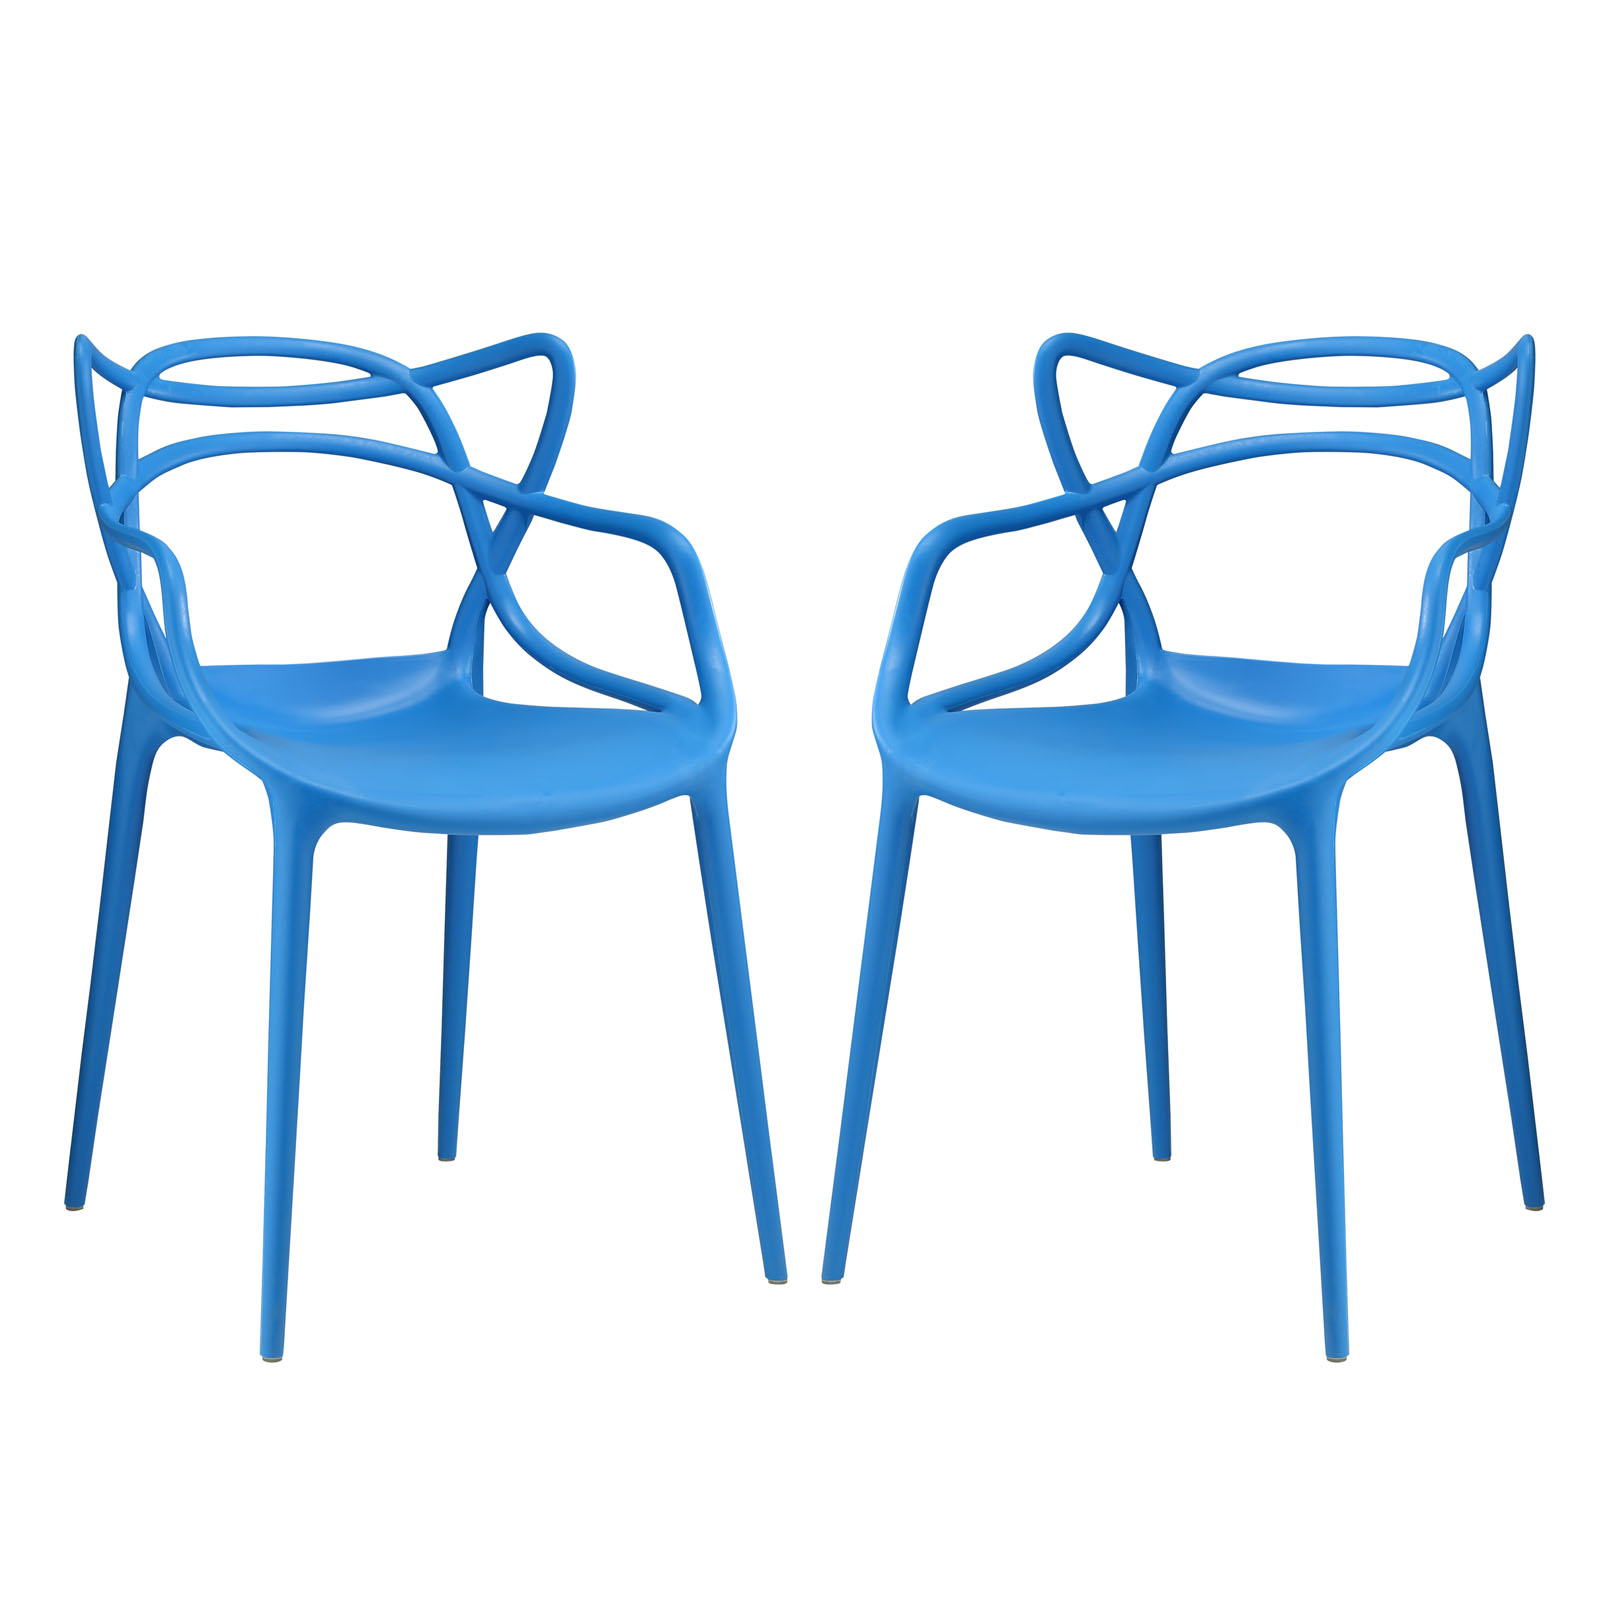 Modern Contemporary Urban Design Outdoor Kitchen Room Dining Chair Set ( Set of Two), Blue, Plastic - image 1 of 4